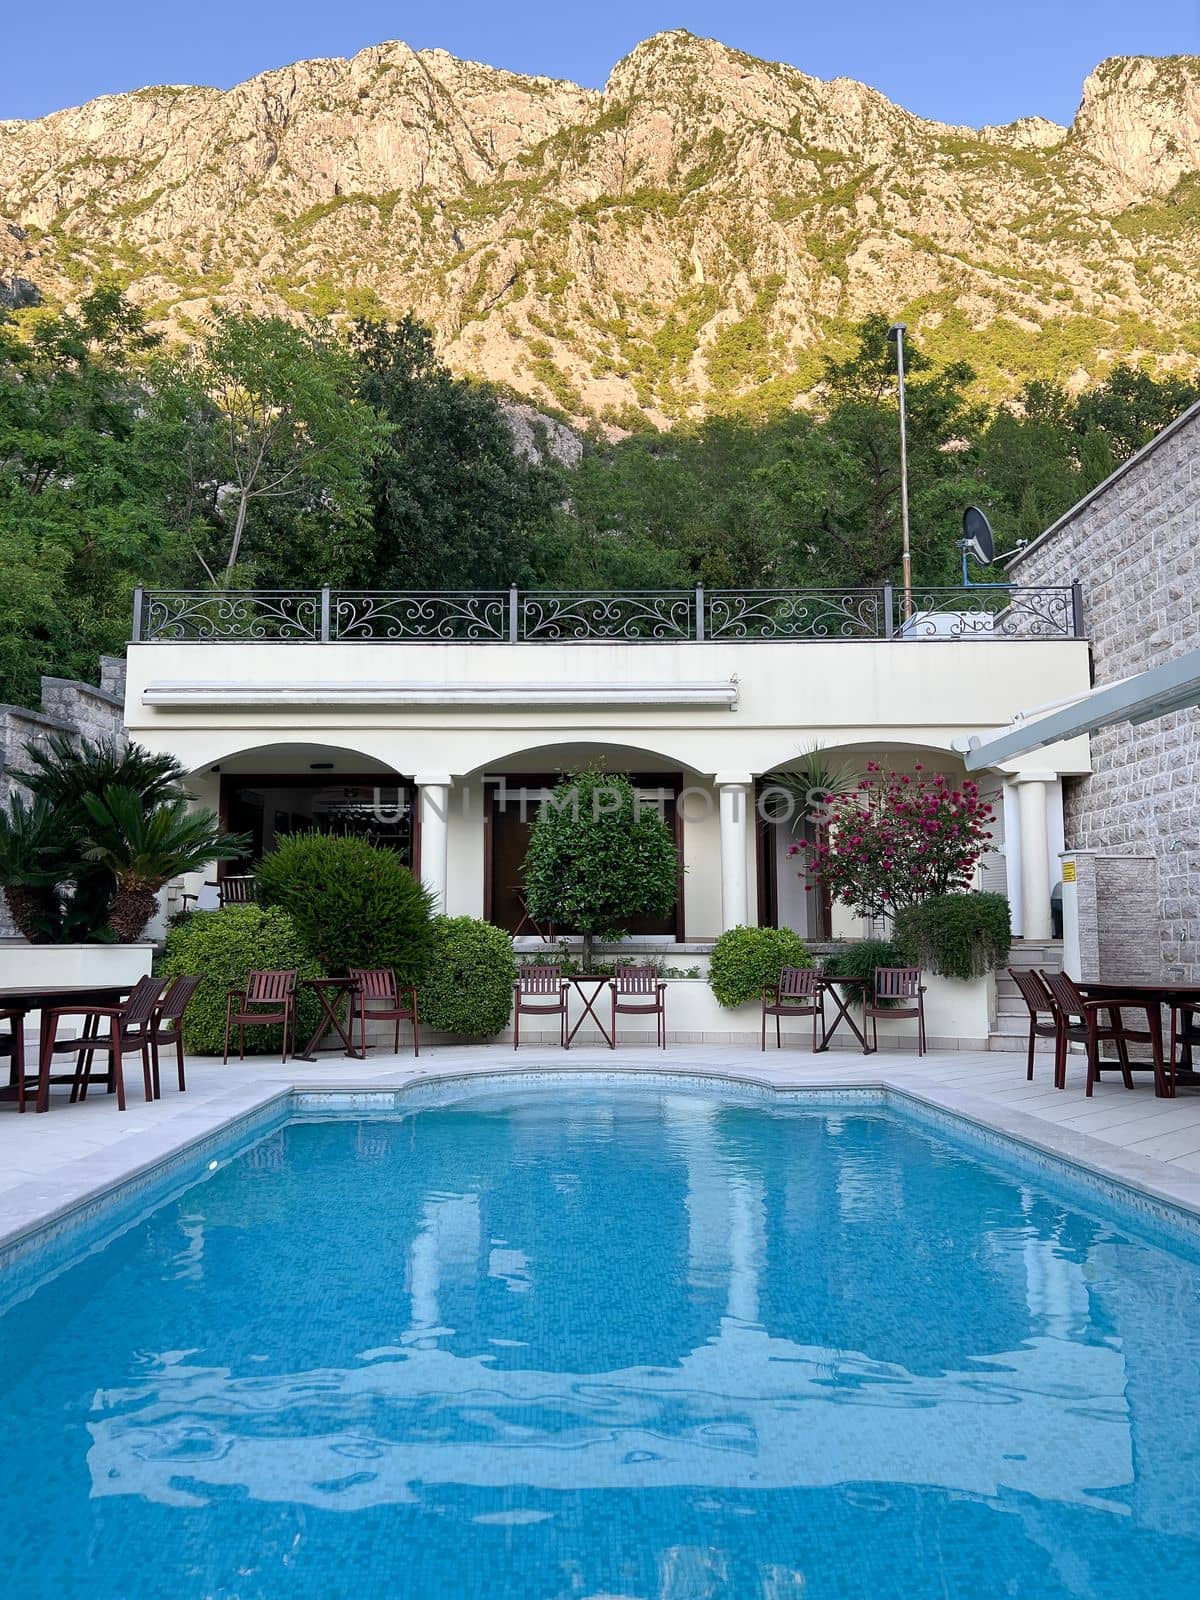 Pool in the courtyard of the house at the foot of the mountains. High quality photo